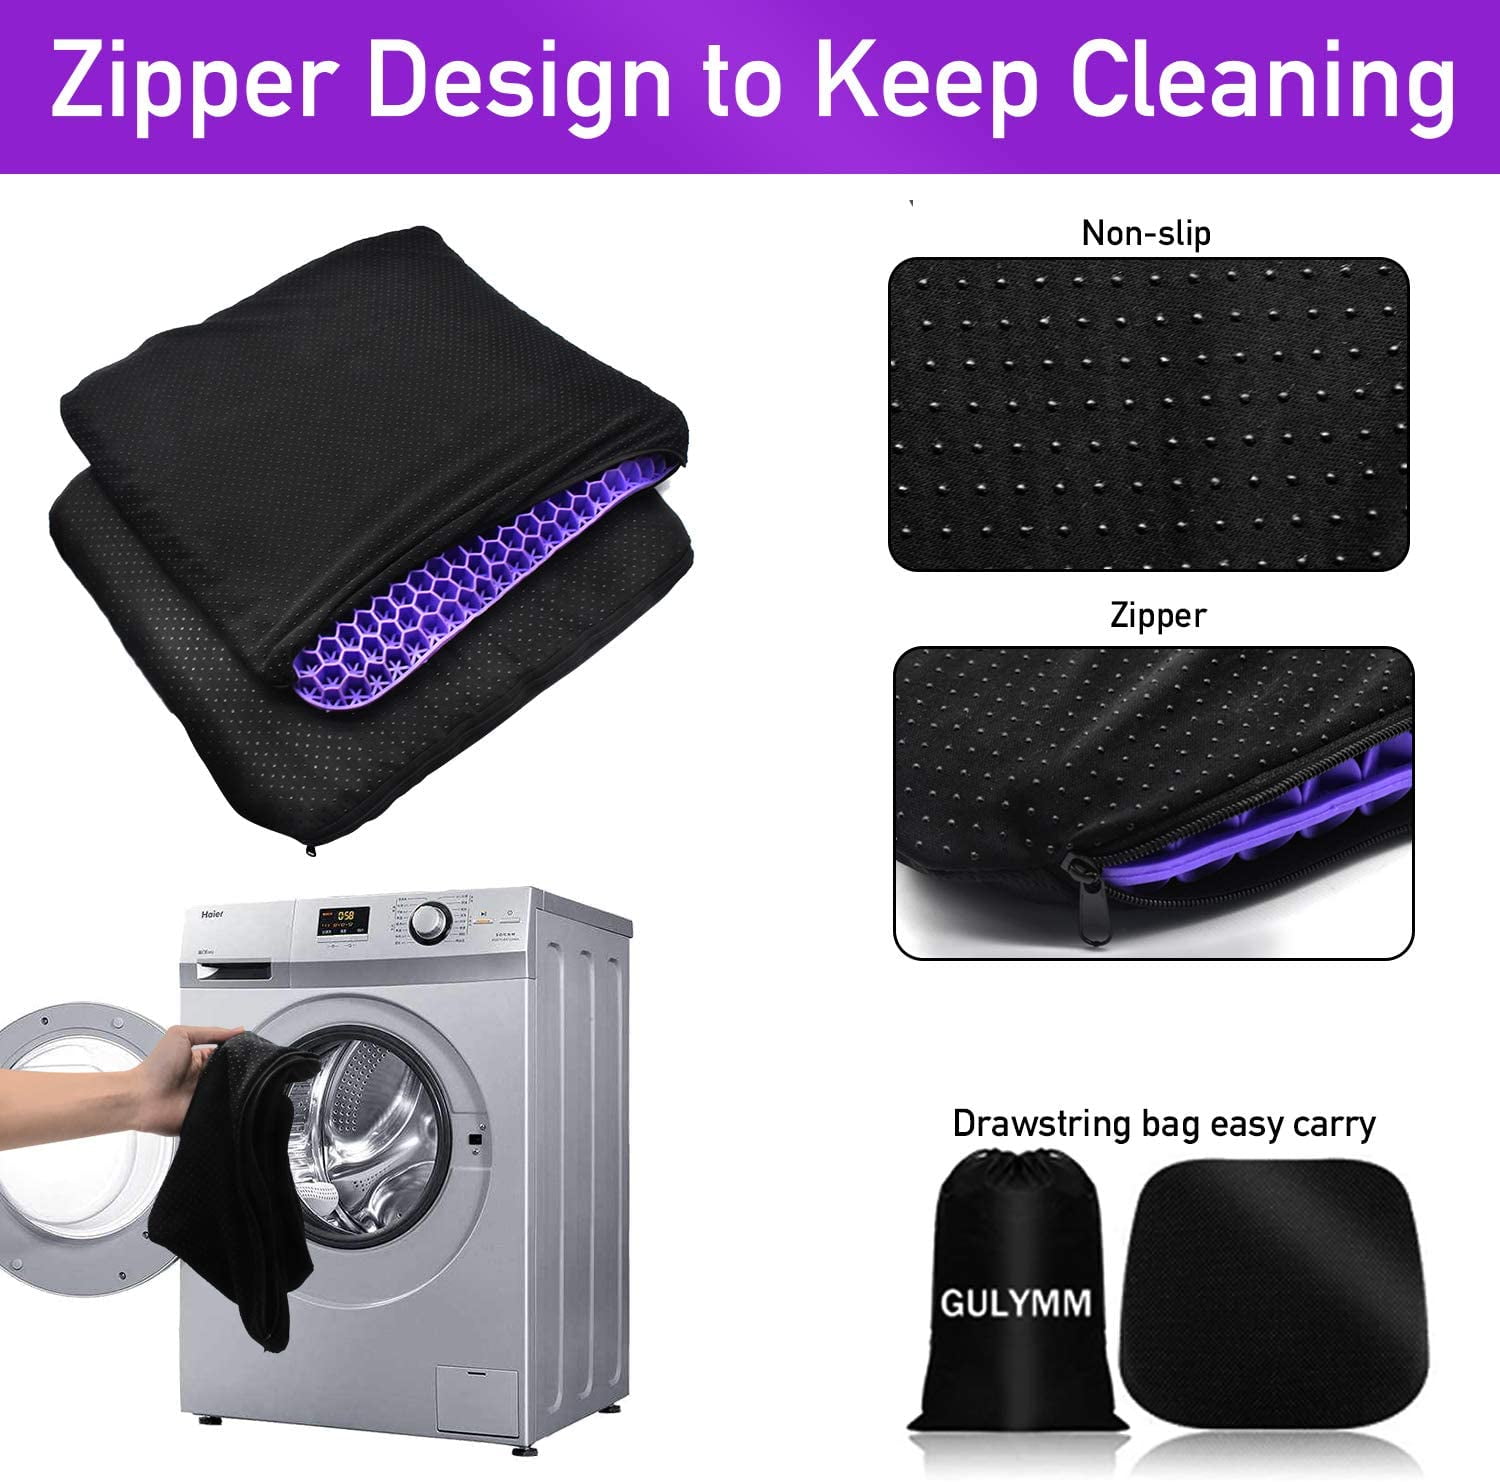 Memory Foam Lumbar Support Pillow with Purple Gel Layer - Online Shopping  for Car Heated Blankets,Heated Seat Cushion,Car Gel Cushions,Free Shipping  From USA